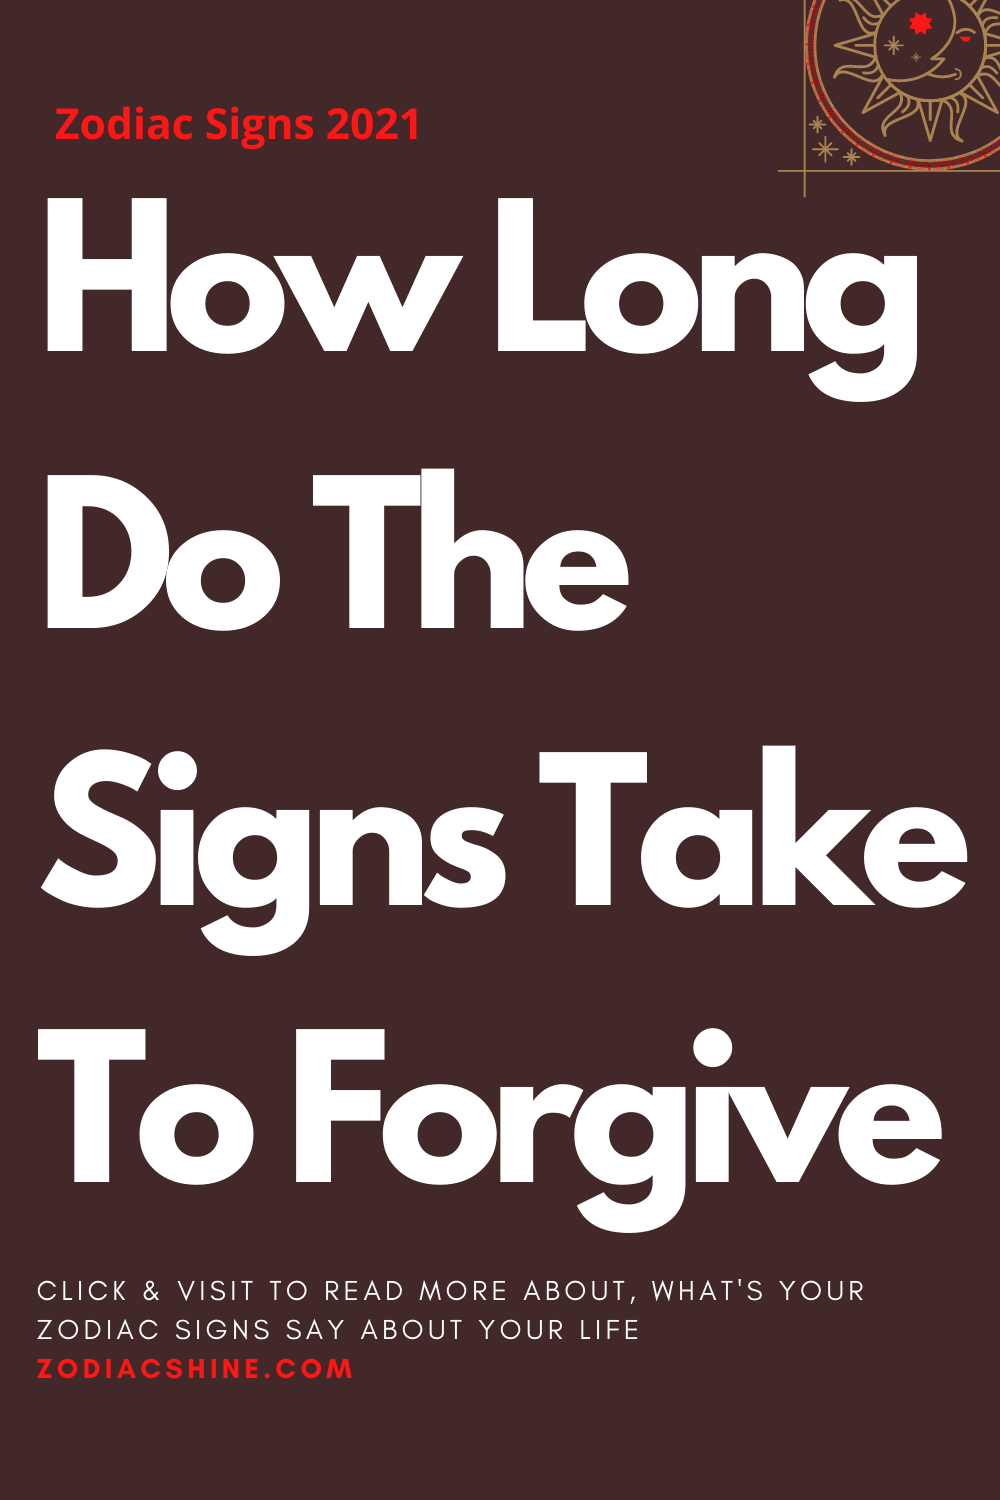 How Long Do The Signs Take To Forgive